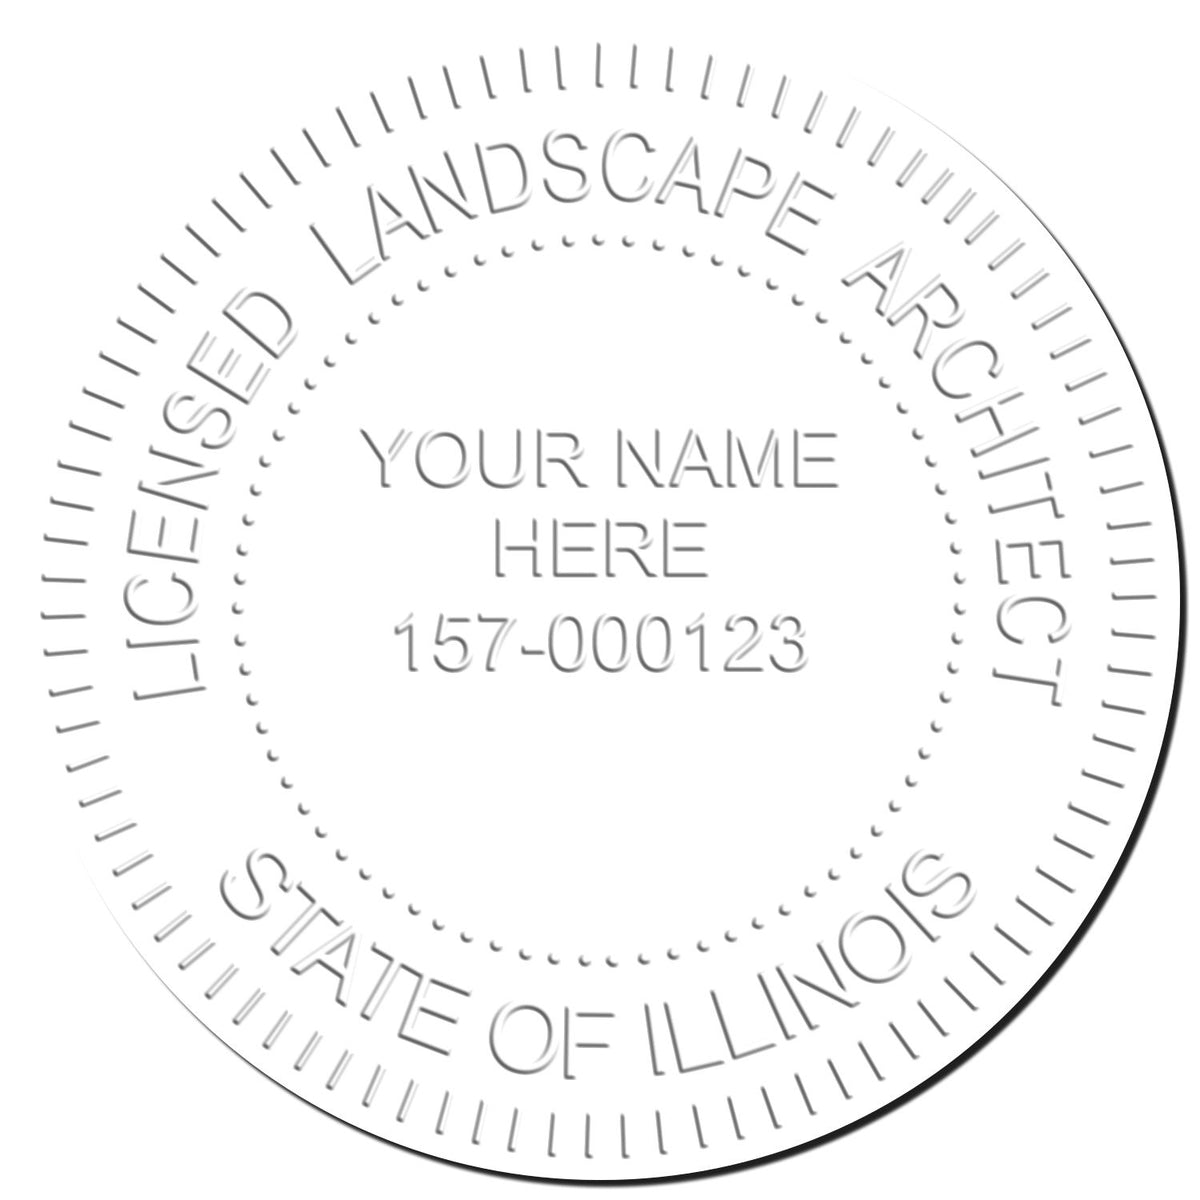 This paper is stamped with a sample imprint of the Soft Pocket Illinois Landscape Architect Embosser, signifying its quality and reliability.